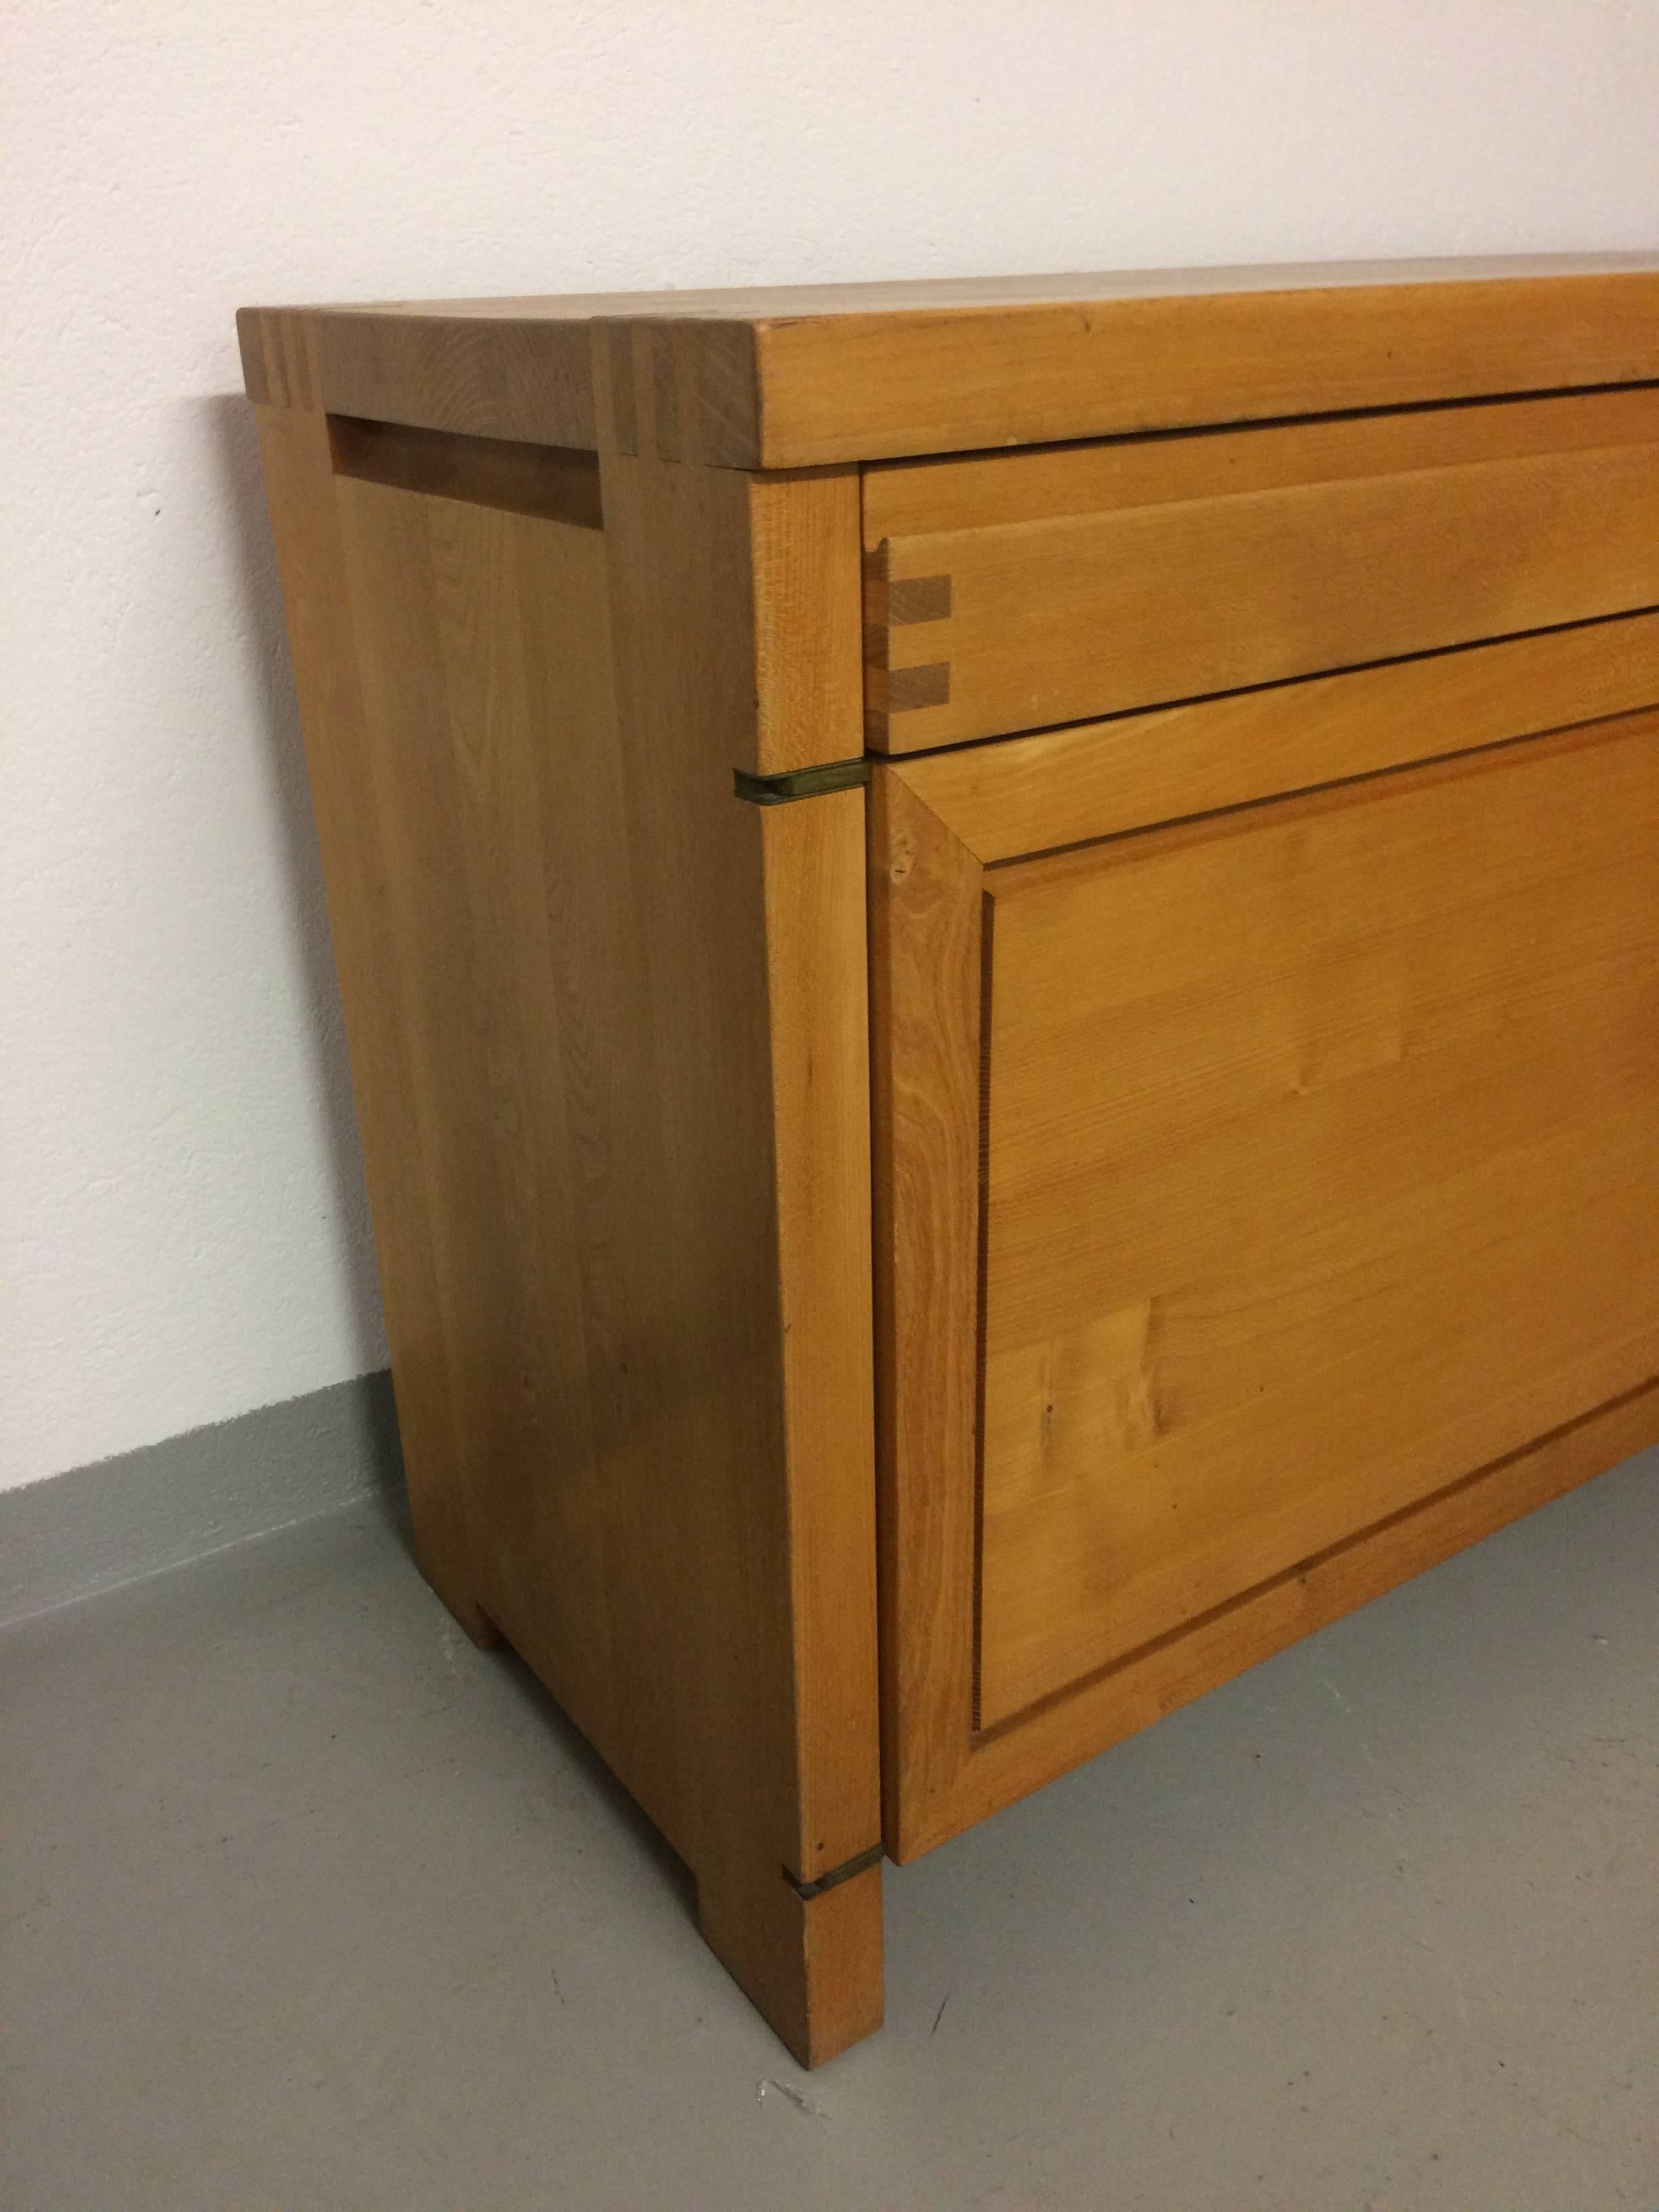 R08 solid elm sideboard by Pierre Chapo.
Very good condition.